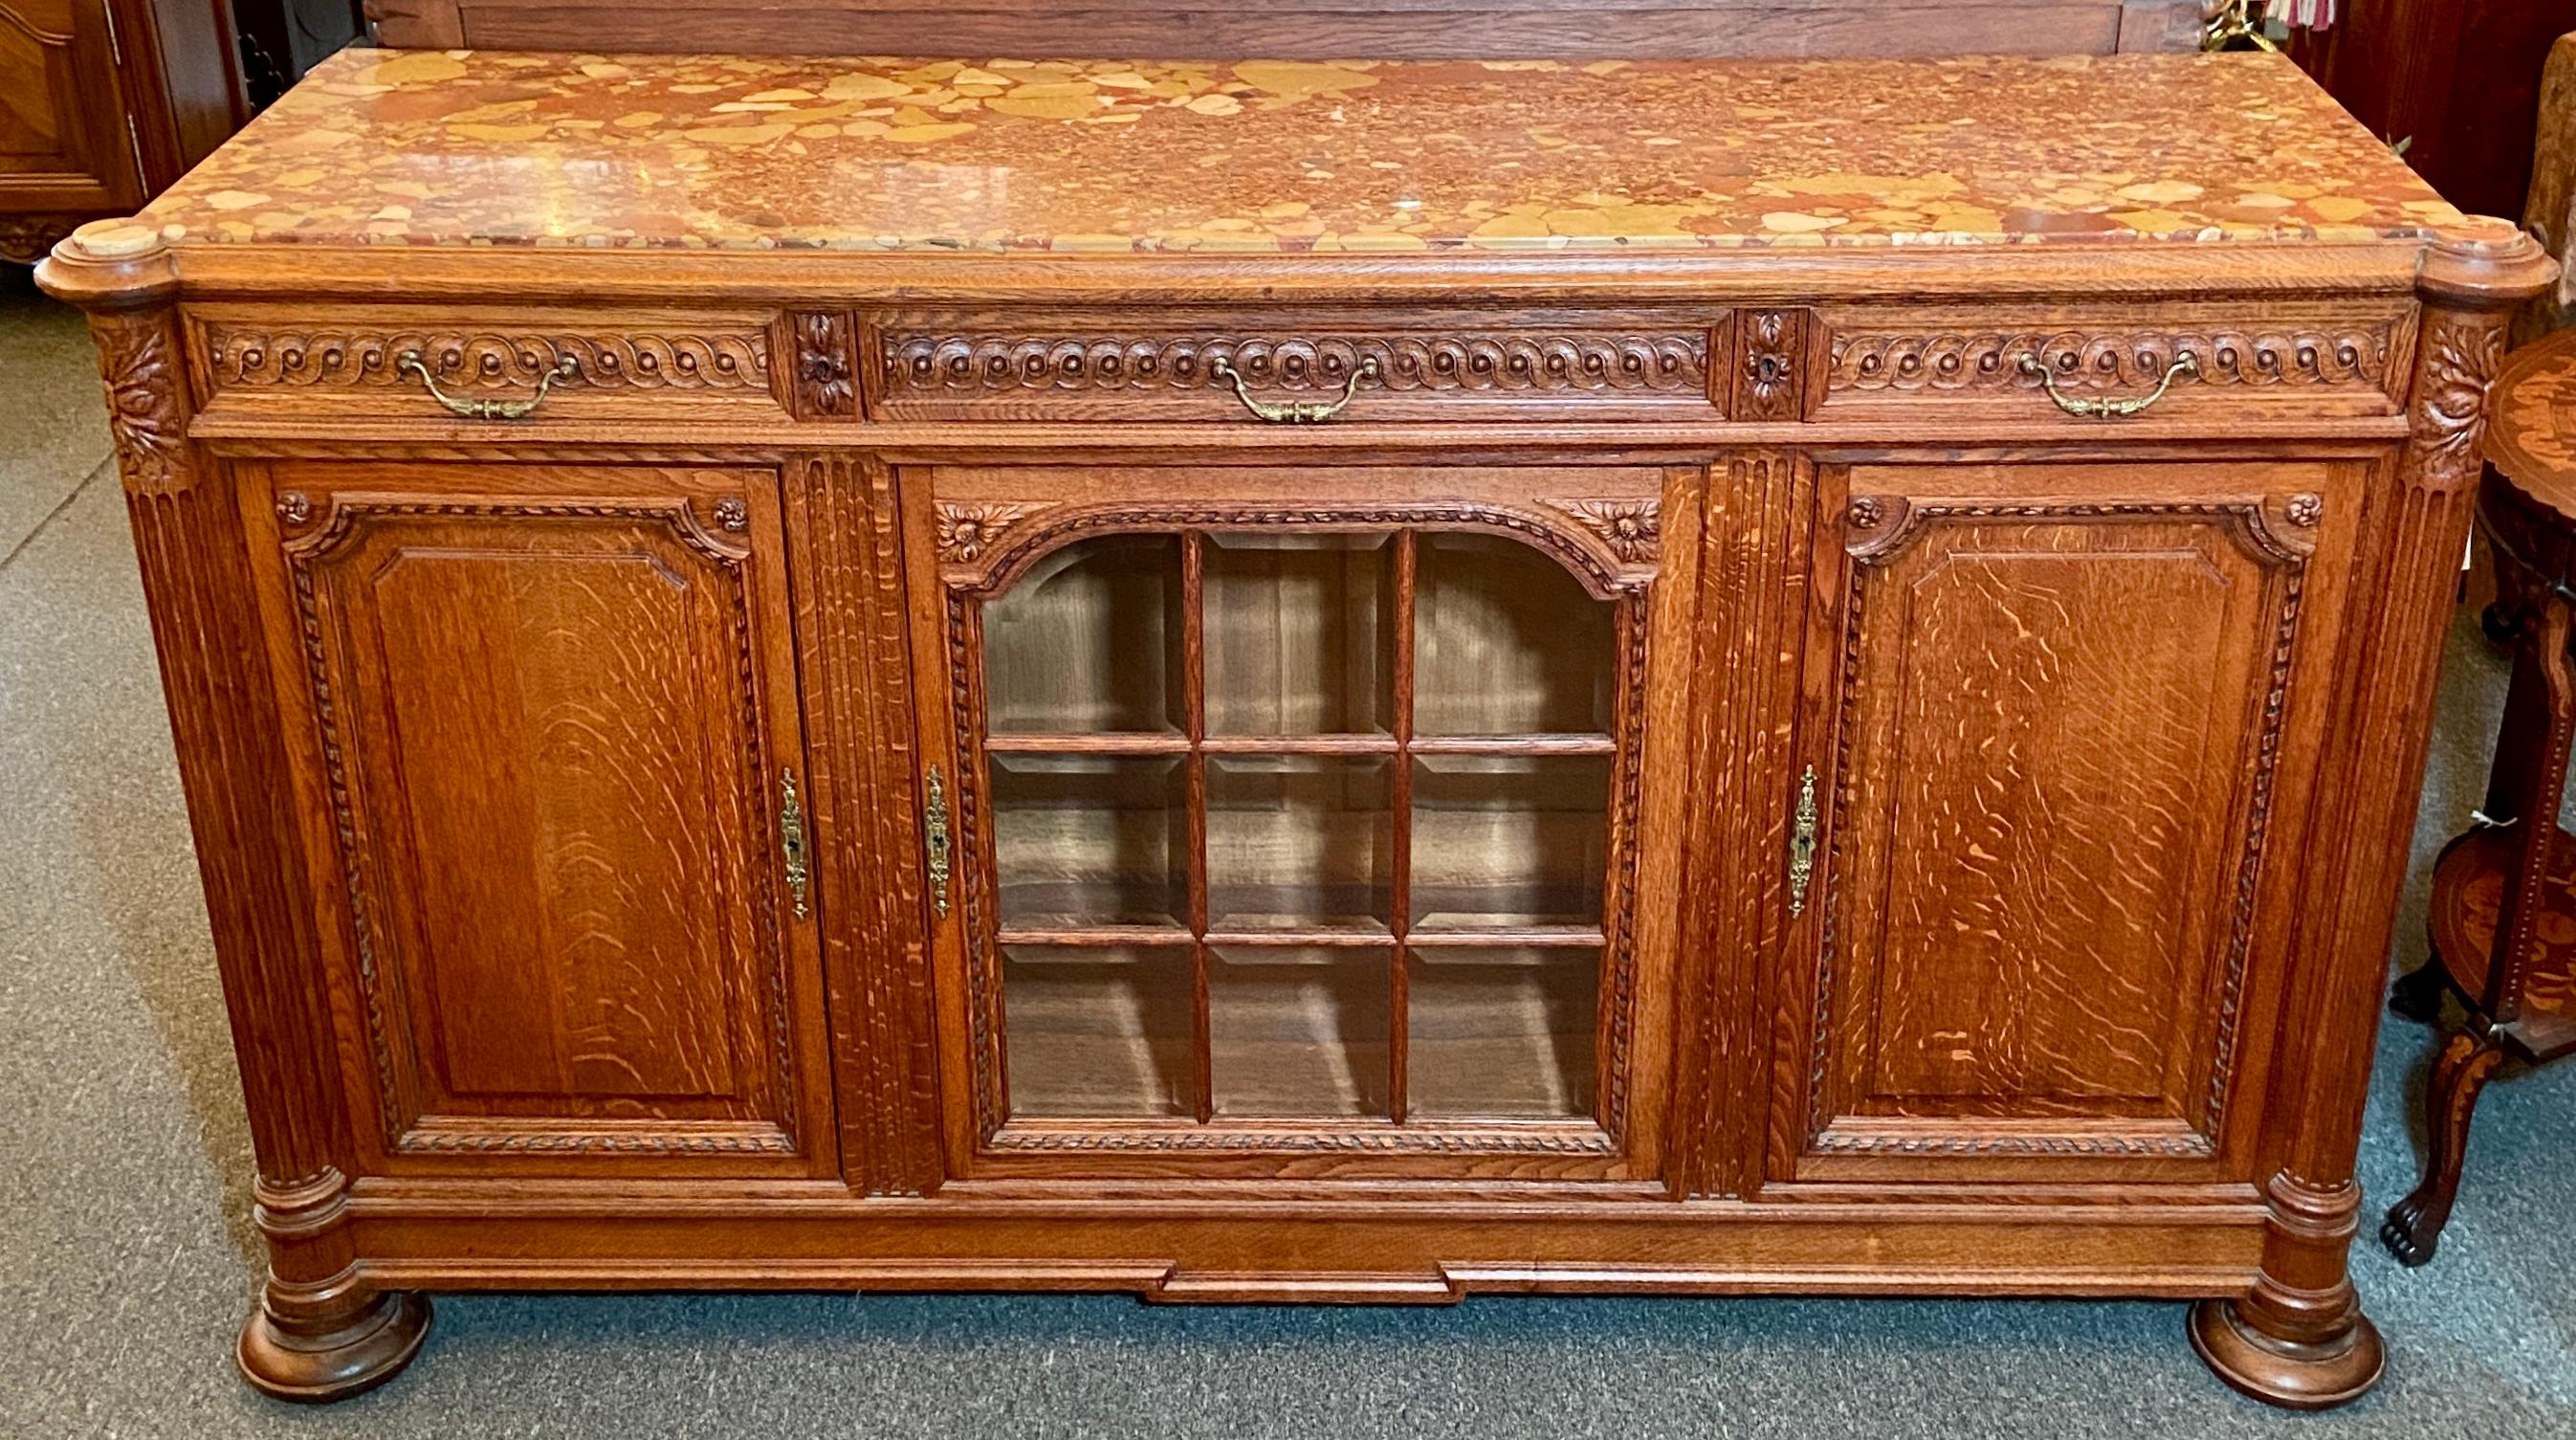 Antique French carved oak buffet with beveled glass door and original marble top, circa 1900.